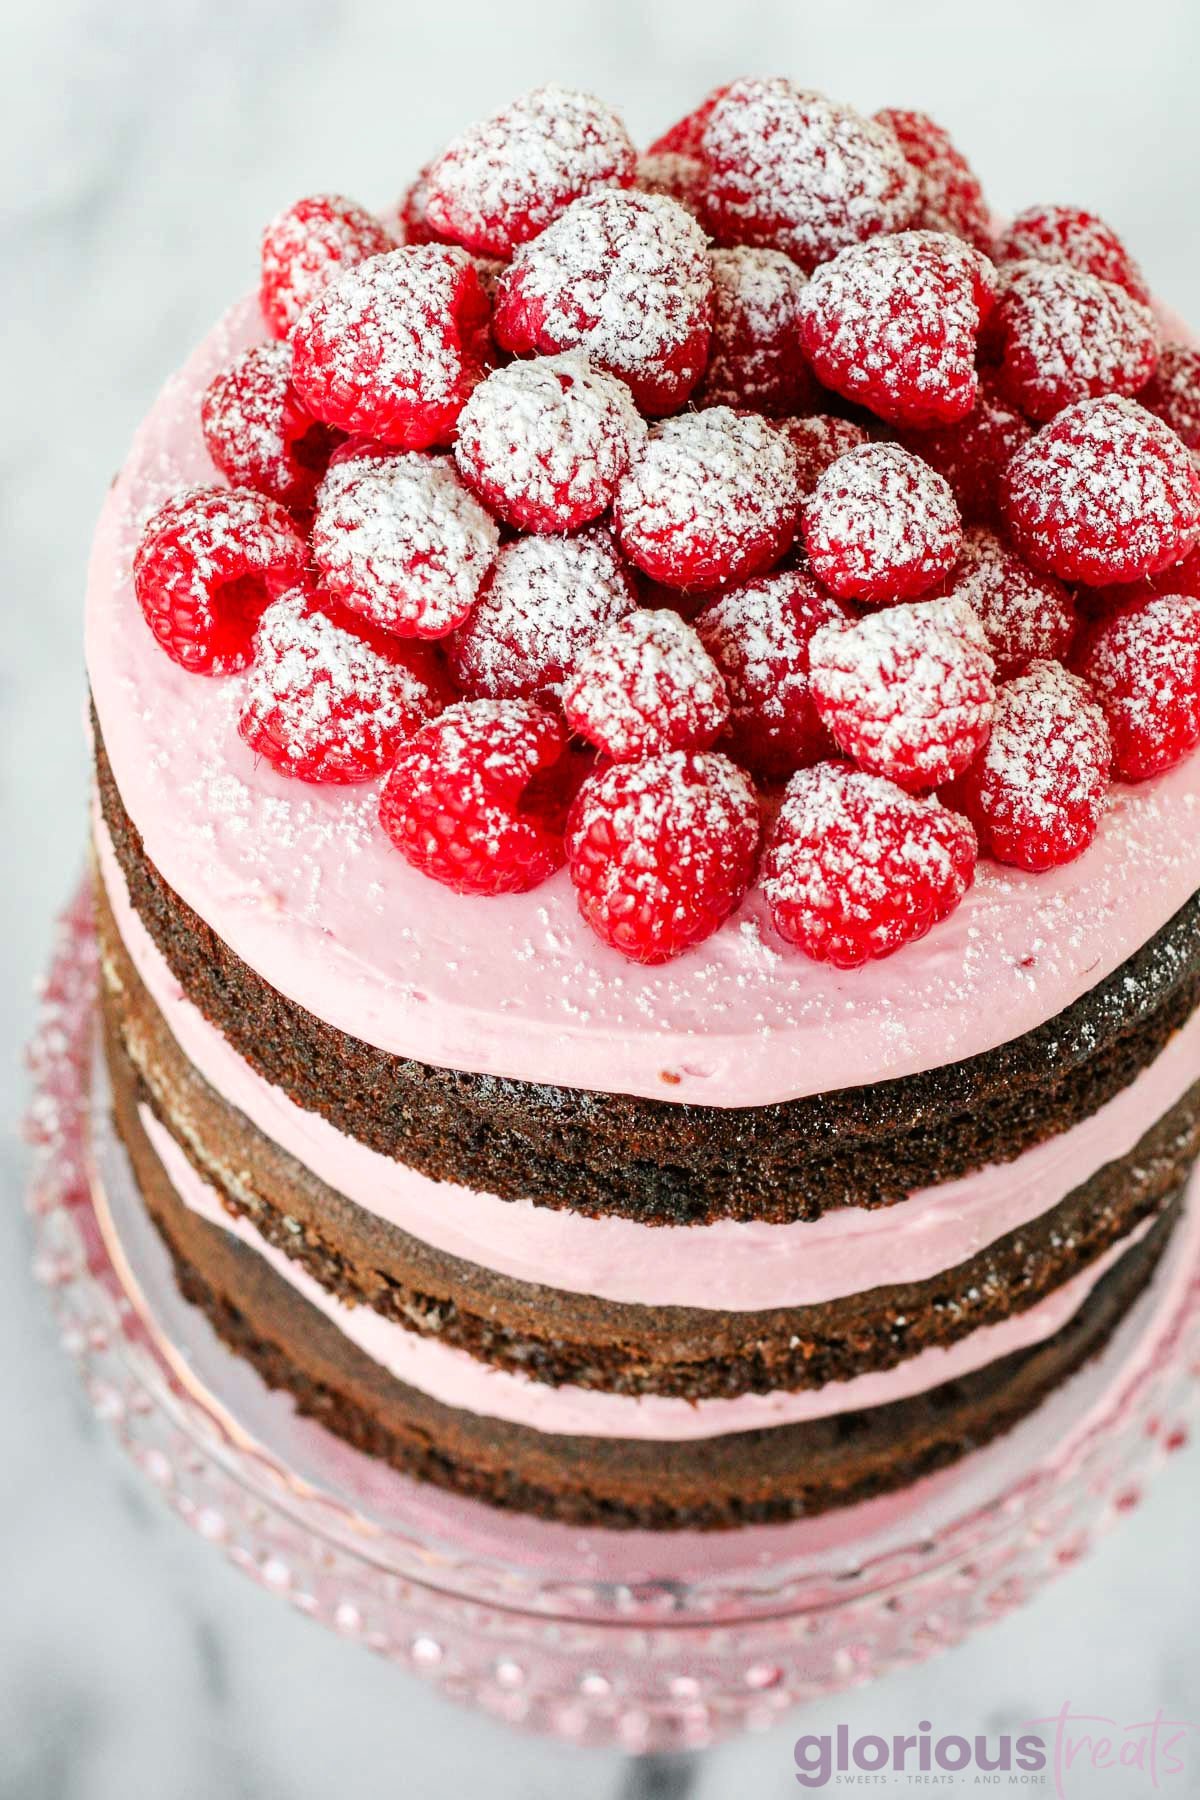 top down look at chocolate cake with raspberry buttercream and fresh raspberries. the cake is naked with just layers showing.